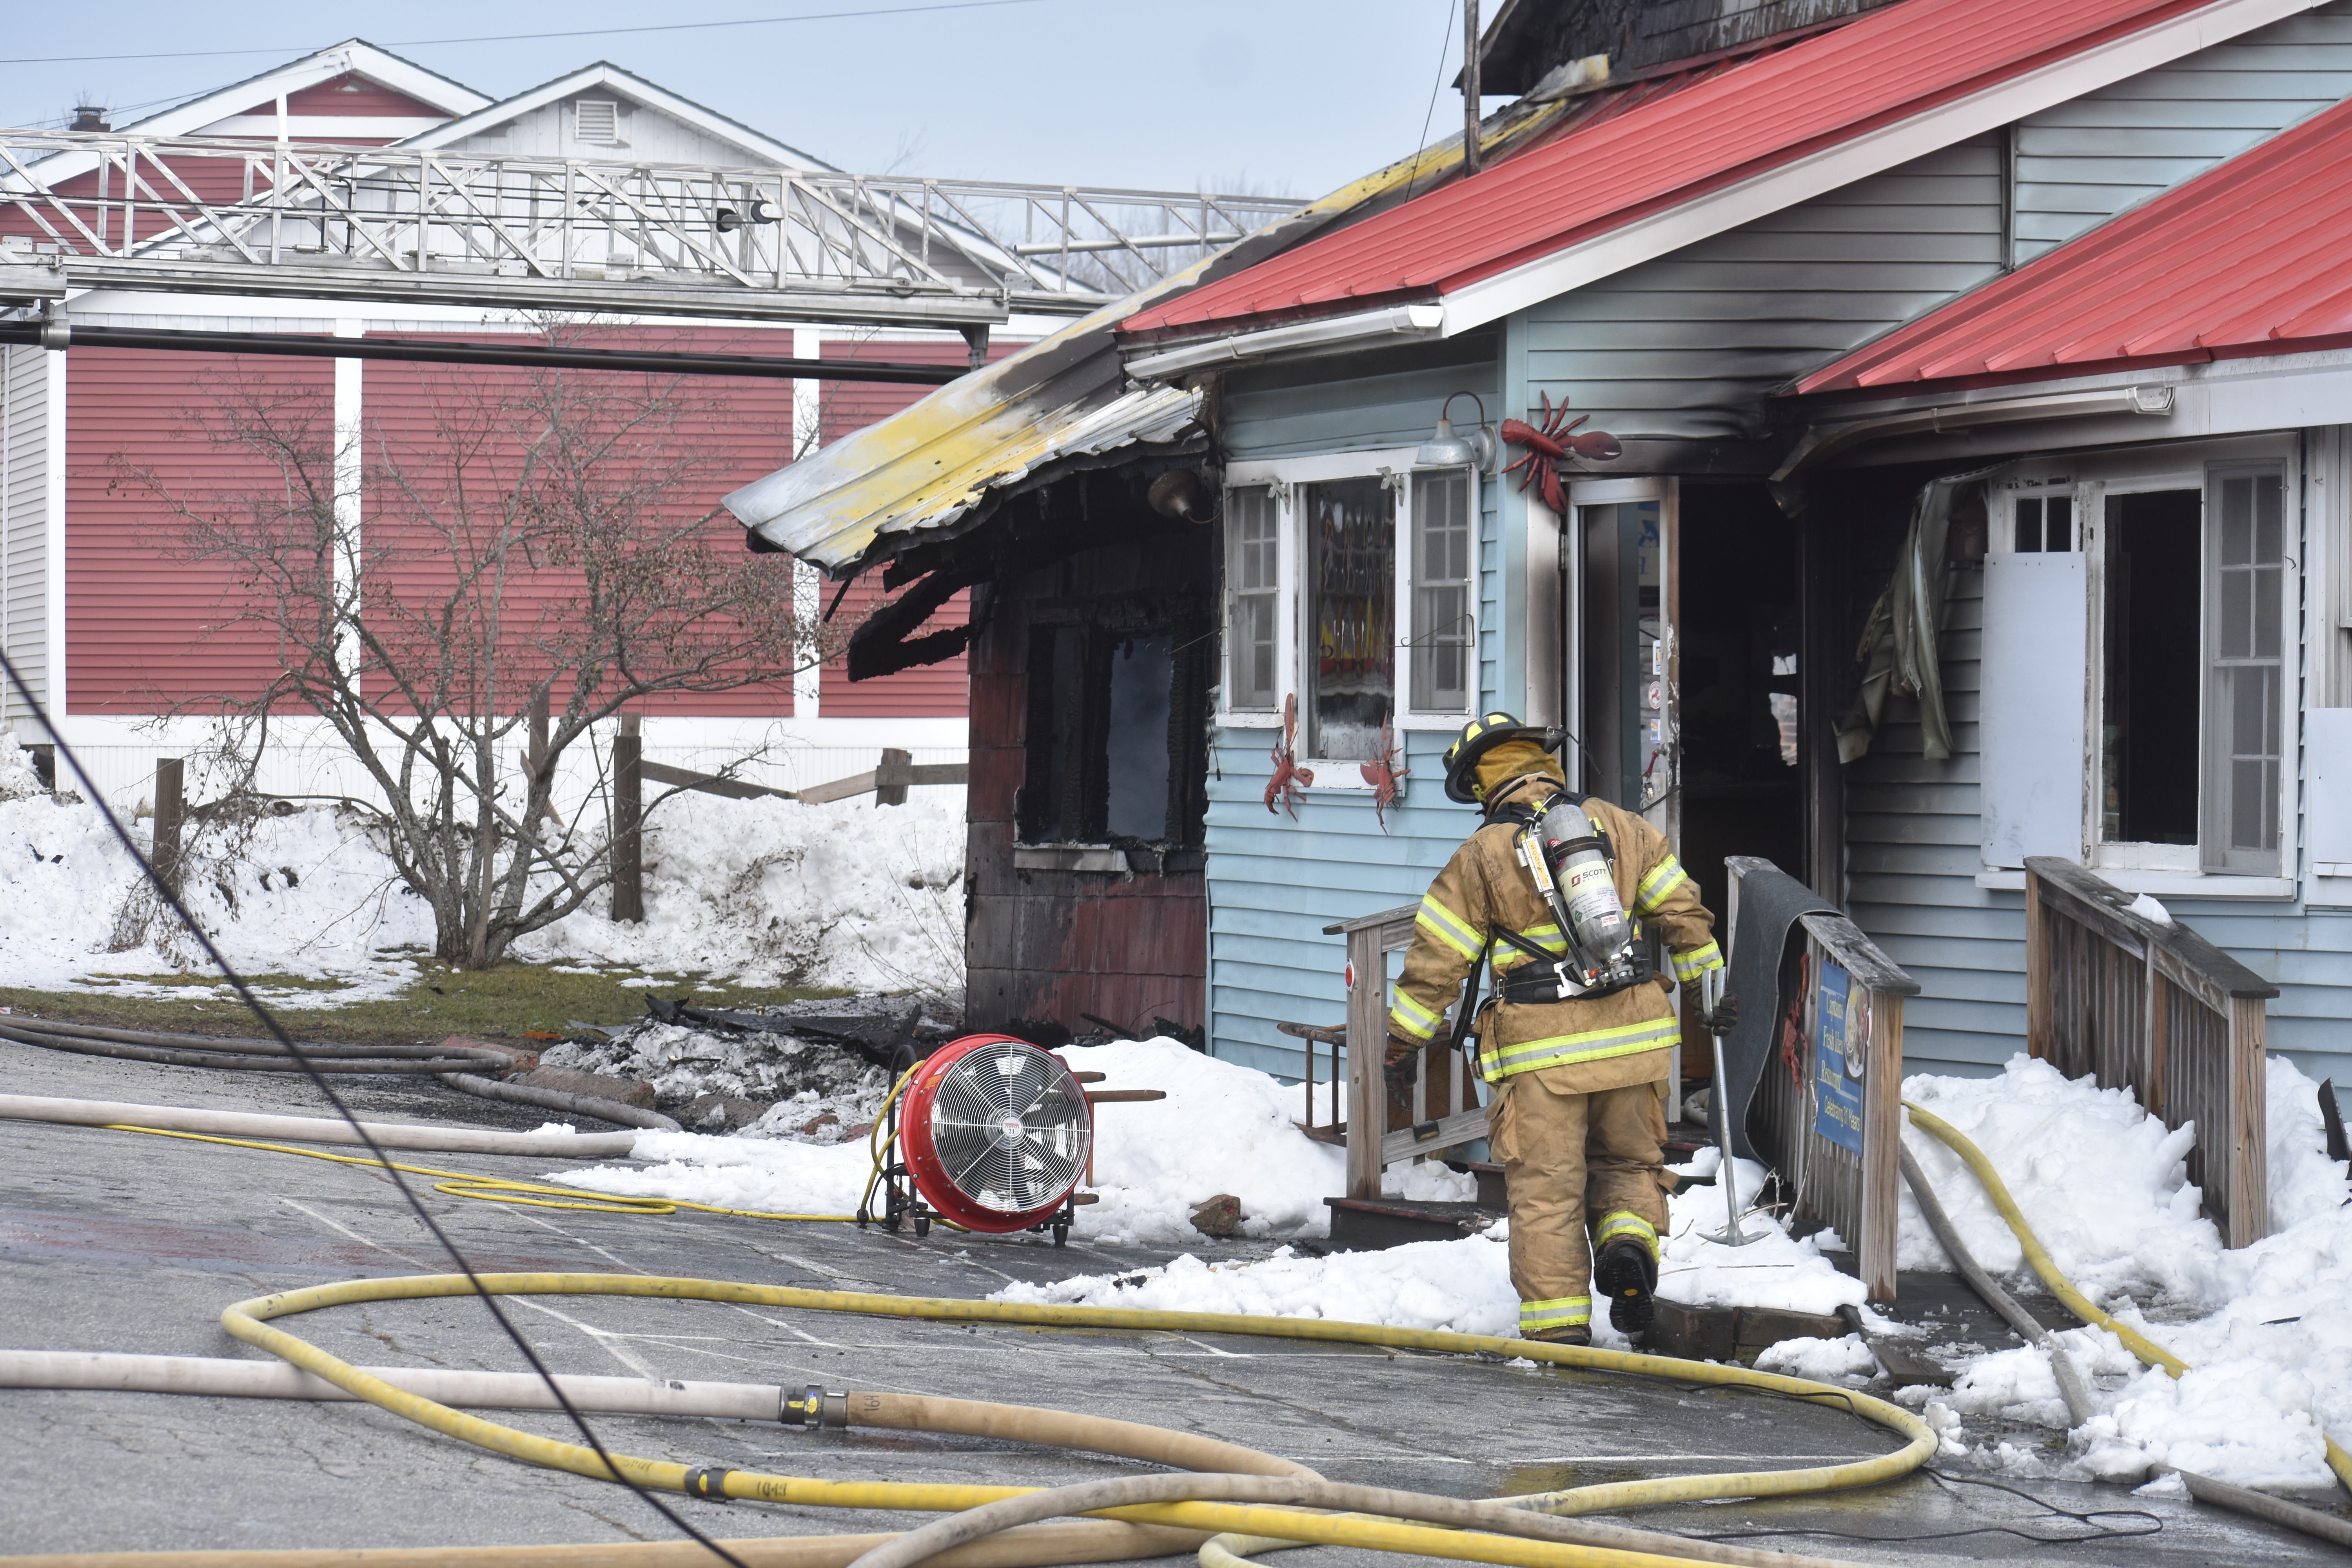 A firefighter works outside Captain’s Fresh Idea, on Route 1 in Waldoboro, the afternoon of Easter Sunday, April 12. Fire caused heavy damage to the interior of the building, according to Waldoboro Deputy Fire Chief Dale Smith. (Alexander Violo photo)